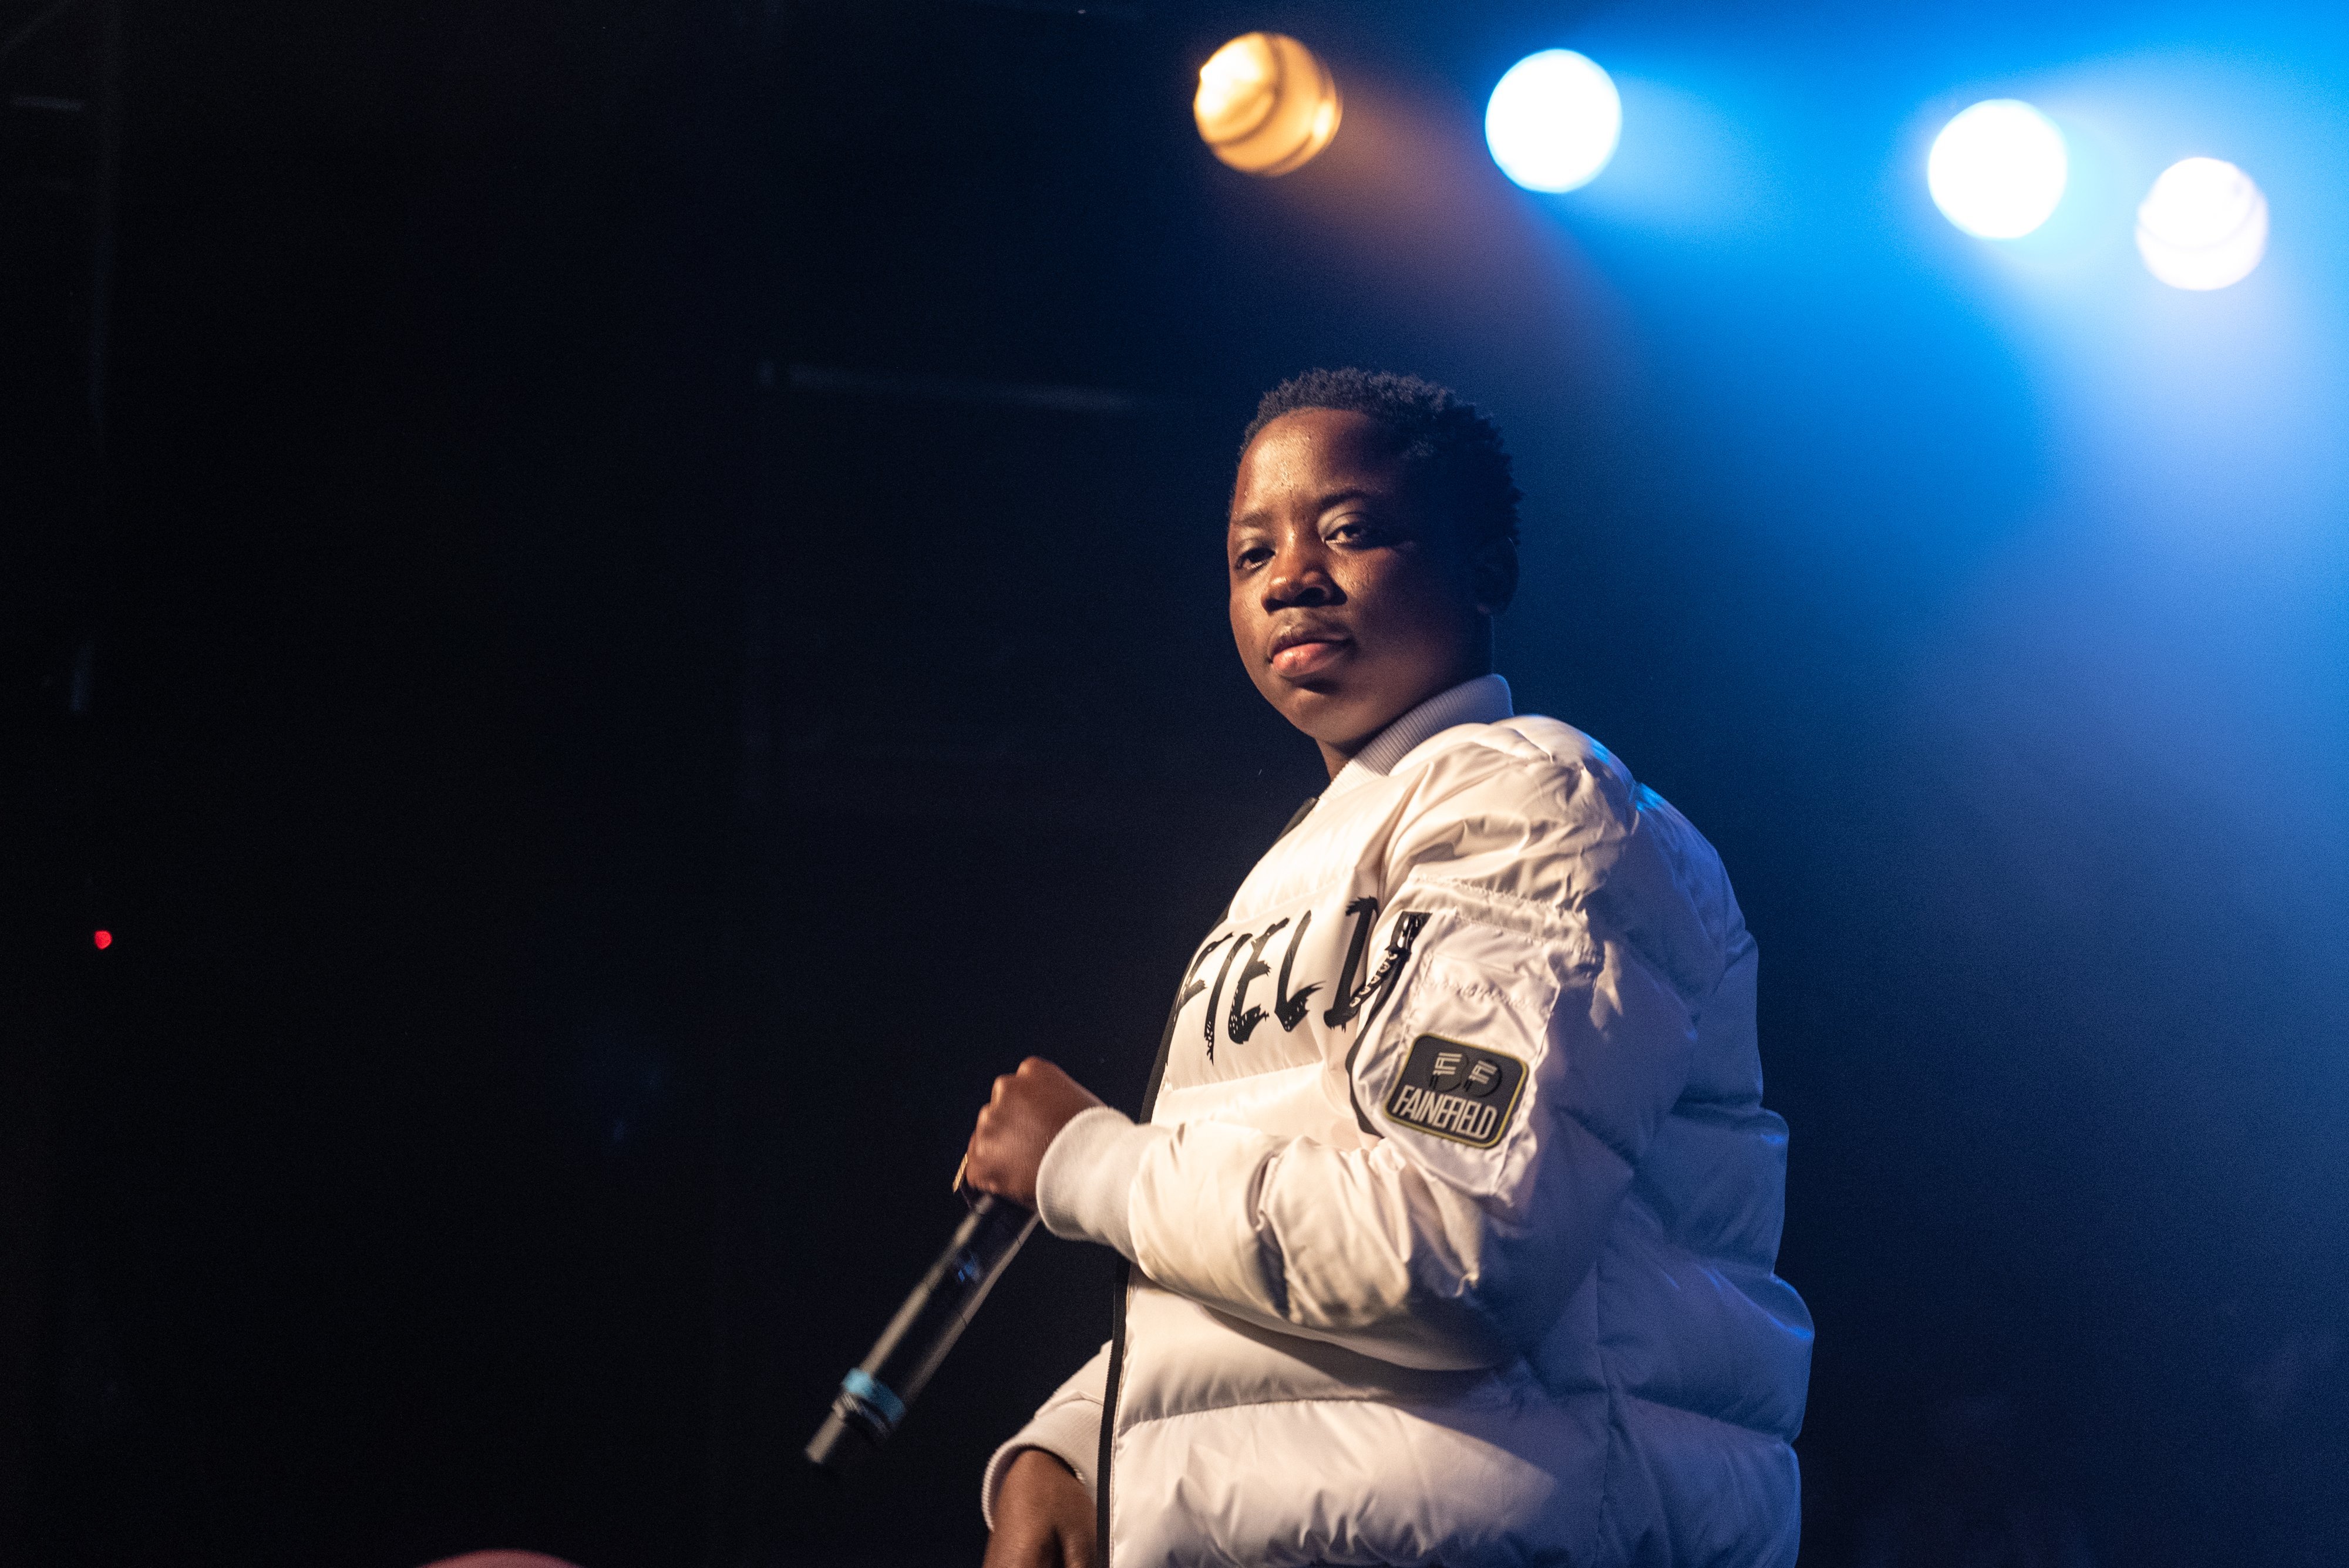 C Glizzy performs live on stage during the Northsbest Festival on Apr. 27, 2019 in Seattle, Washington. | Photo: Getty Images